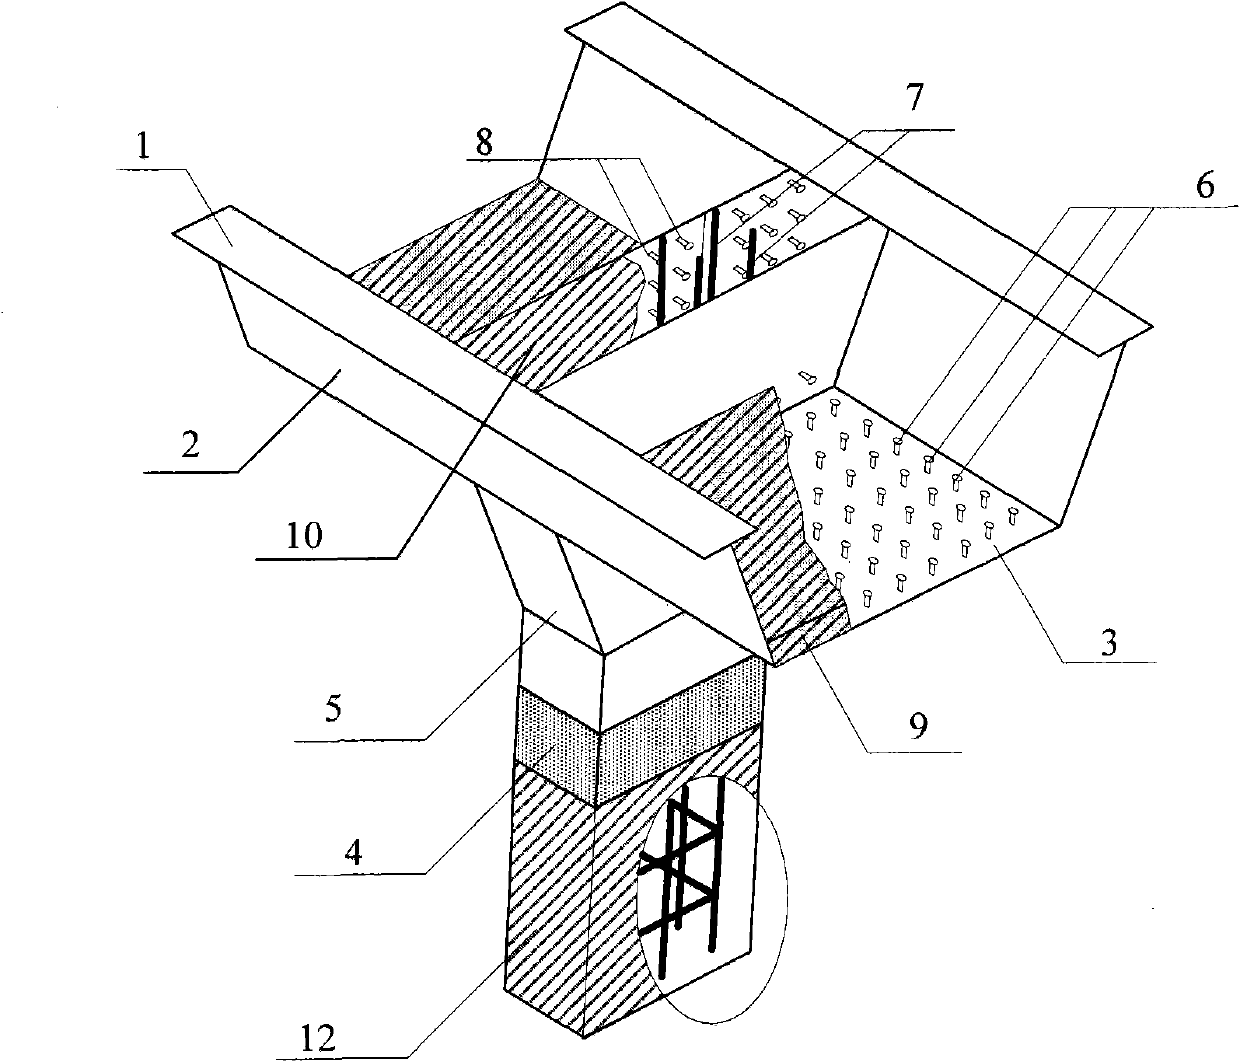 Rigid connection method for steel beam and concrete pier